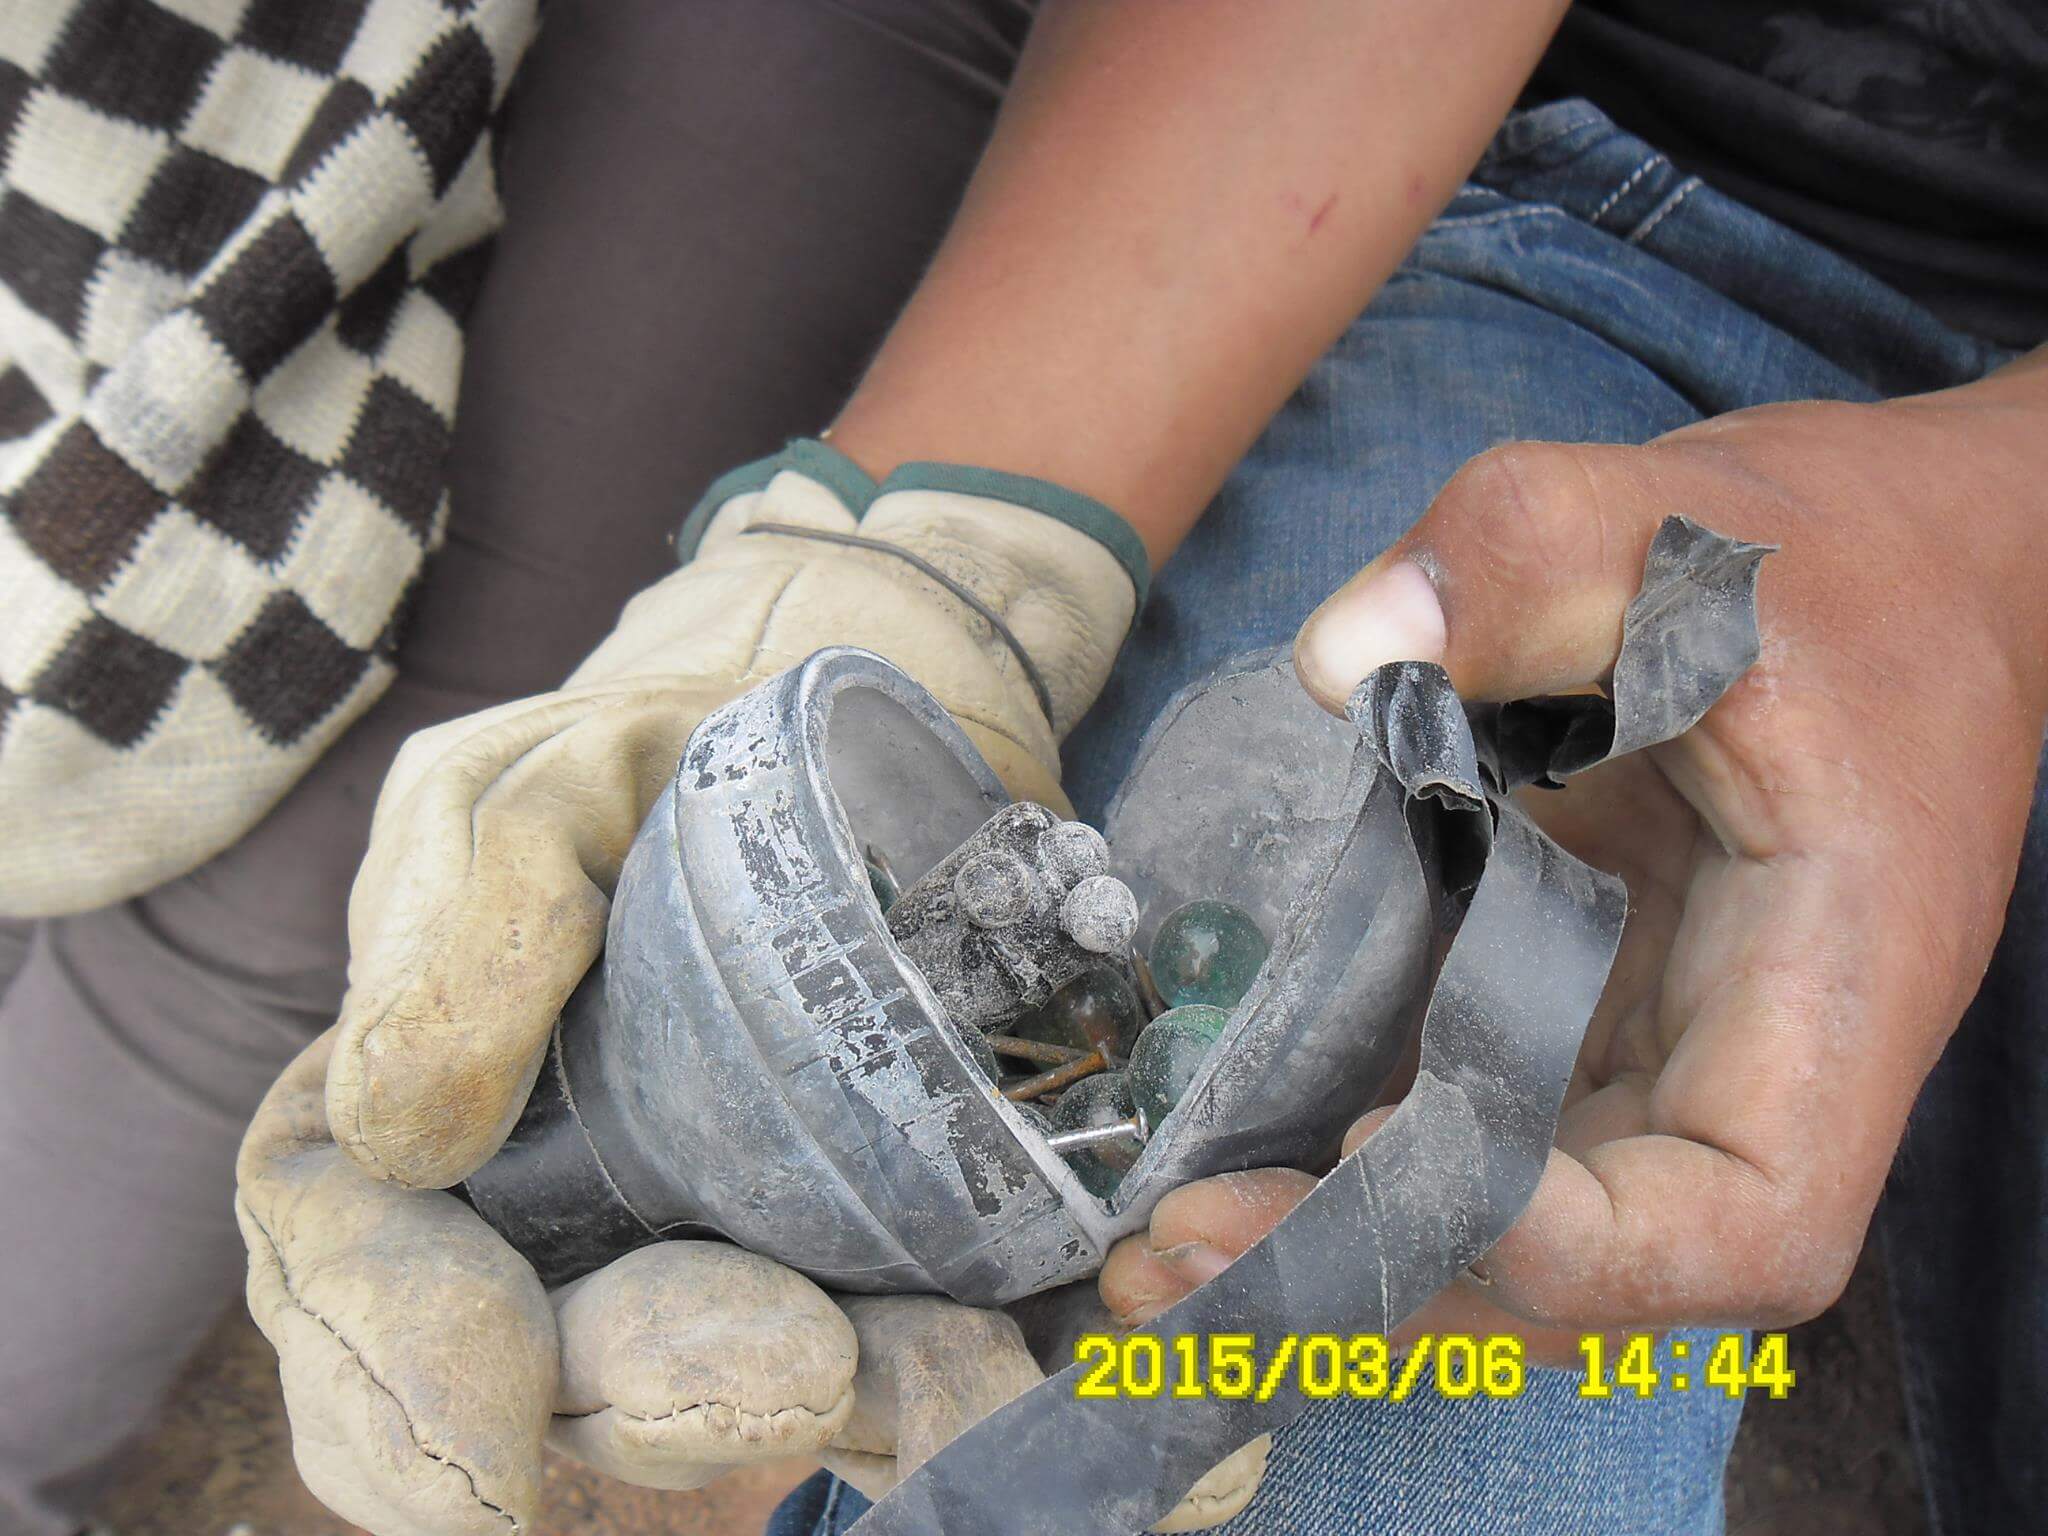 Example of a home made bomb used by the riot squad in 2015. Archival Photo by a Nasa activist